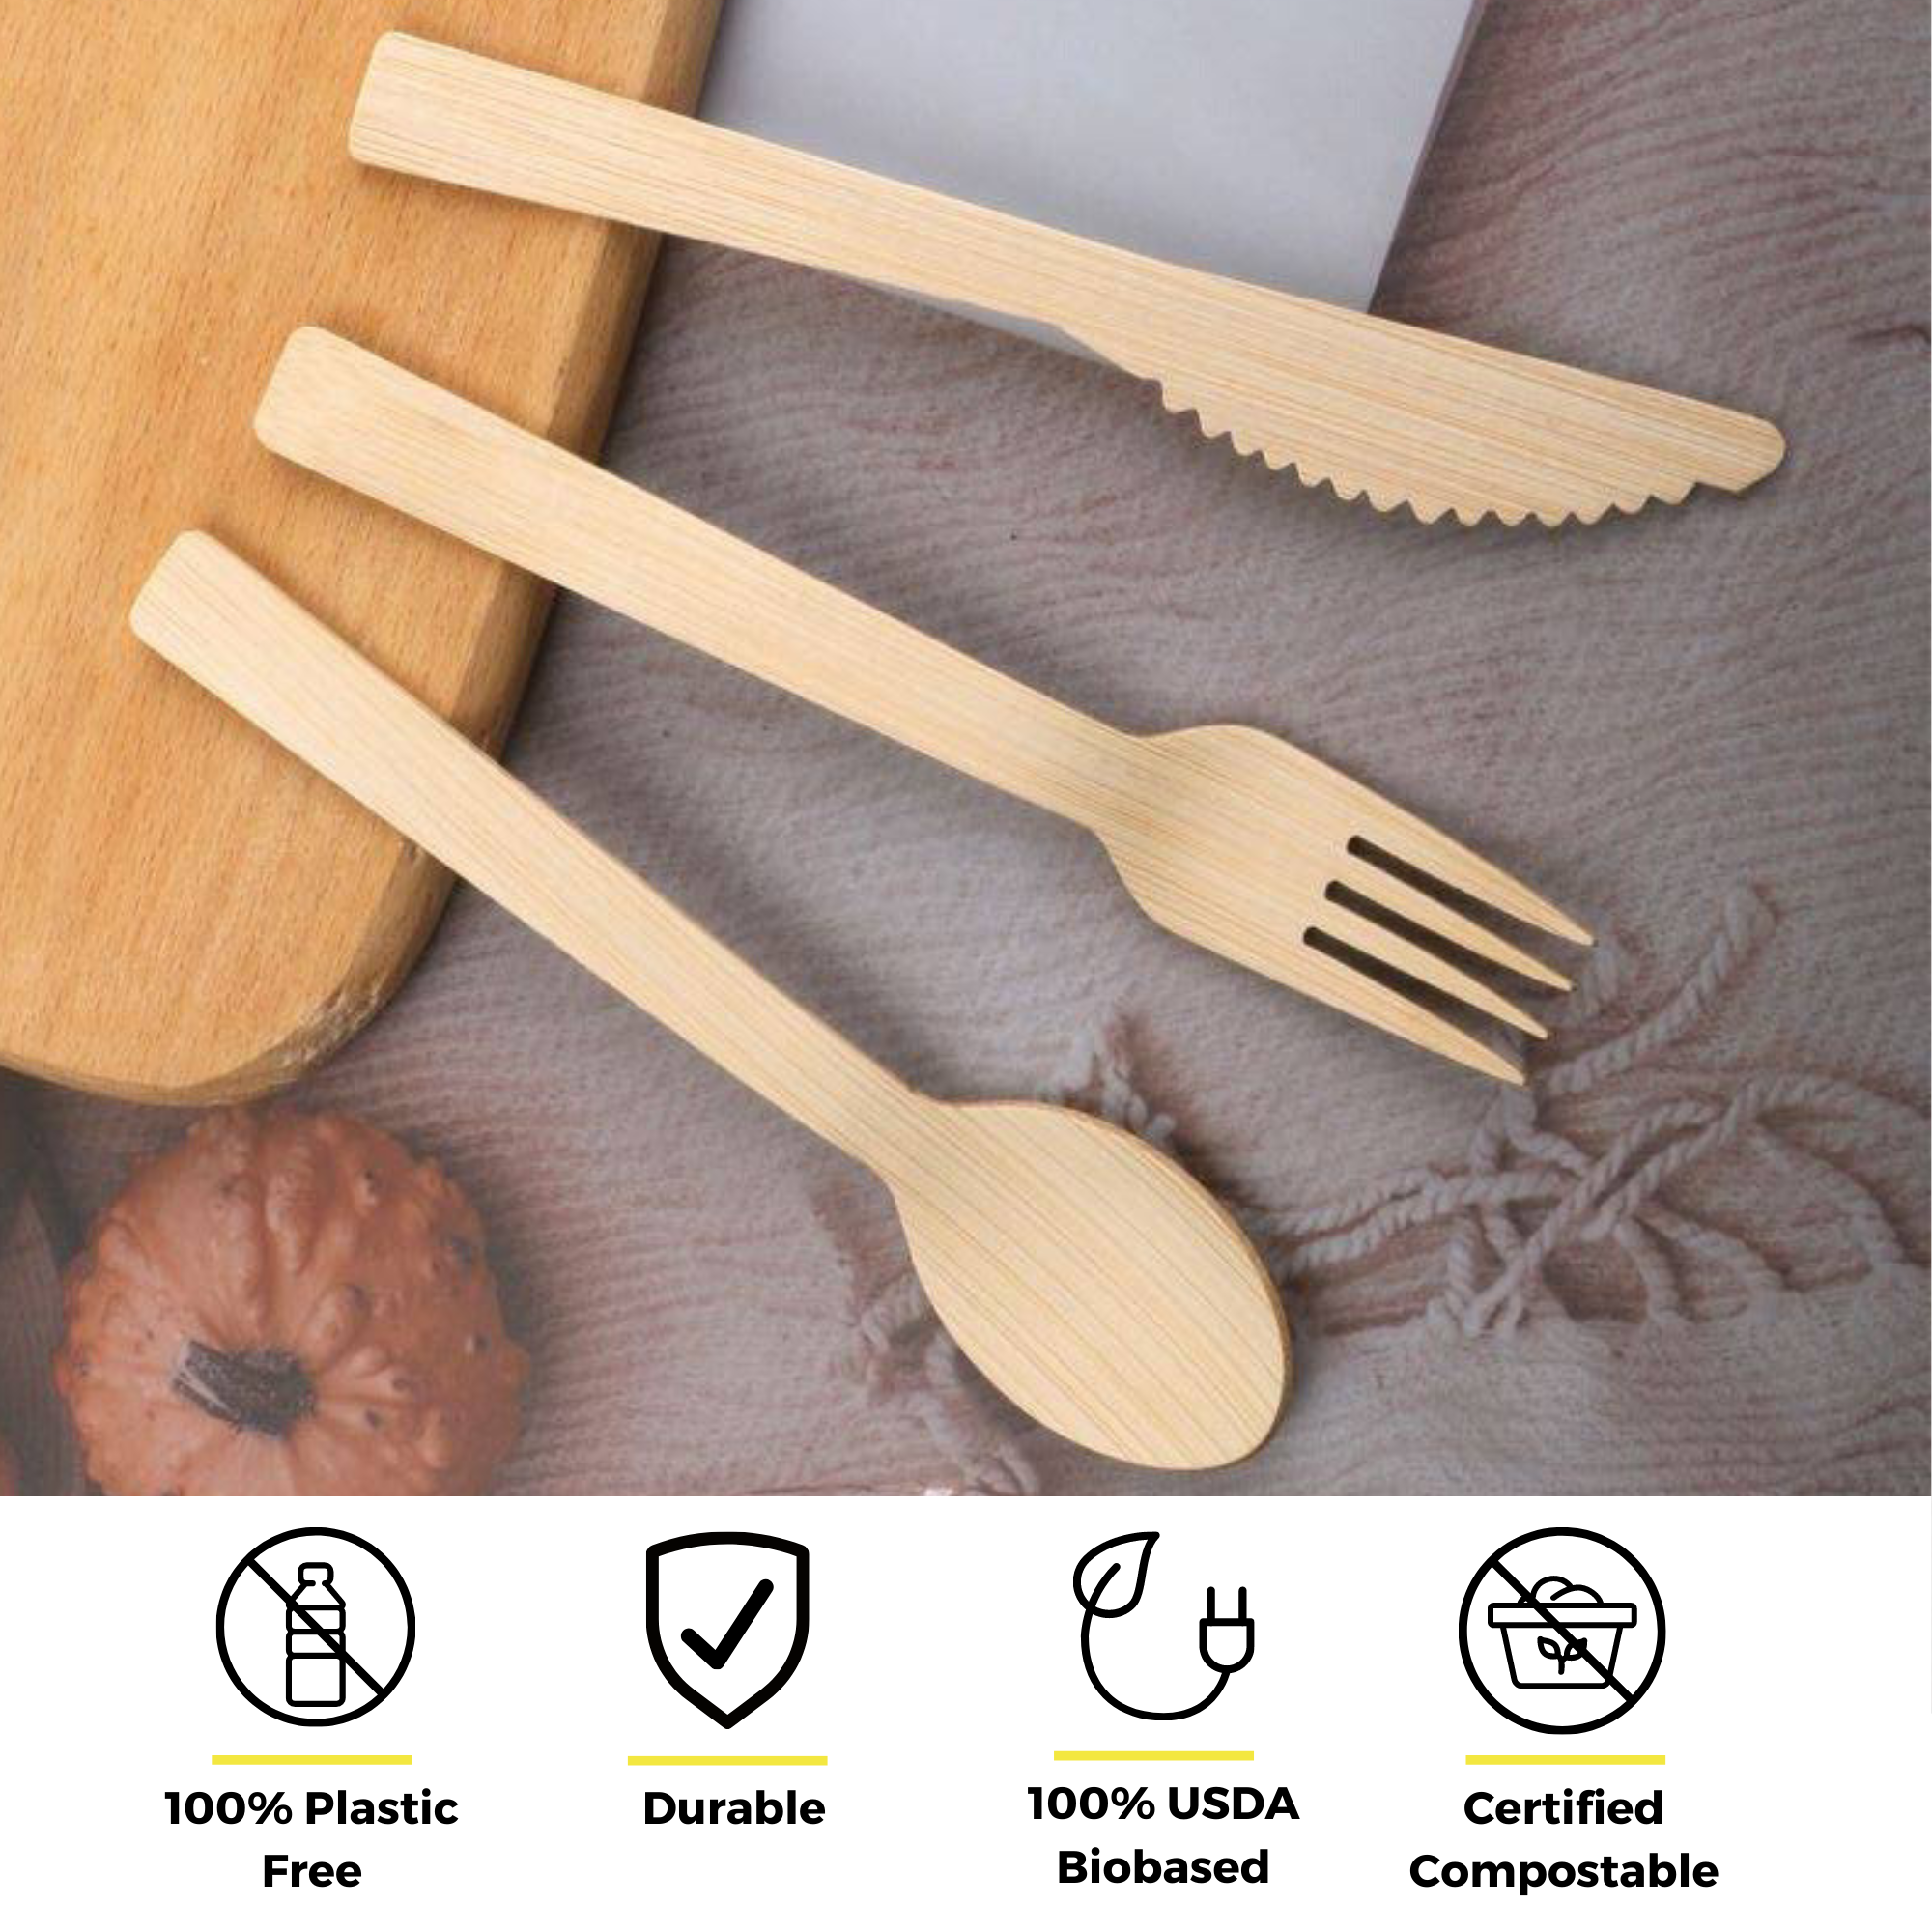 Holy City Straw Co. presents their sustainable bamboo cutlery set against a soft fabric background, with a rolling pin partially visible. The set includes a knife, fork, and spoon, each boasting a natural wood finish. Icons underscore the utensils' eco-friendly qualities: 100% plastic-free, durable, 100% USDA biobased, and certified compostable.